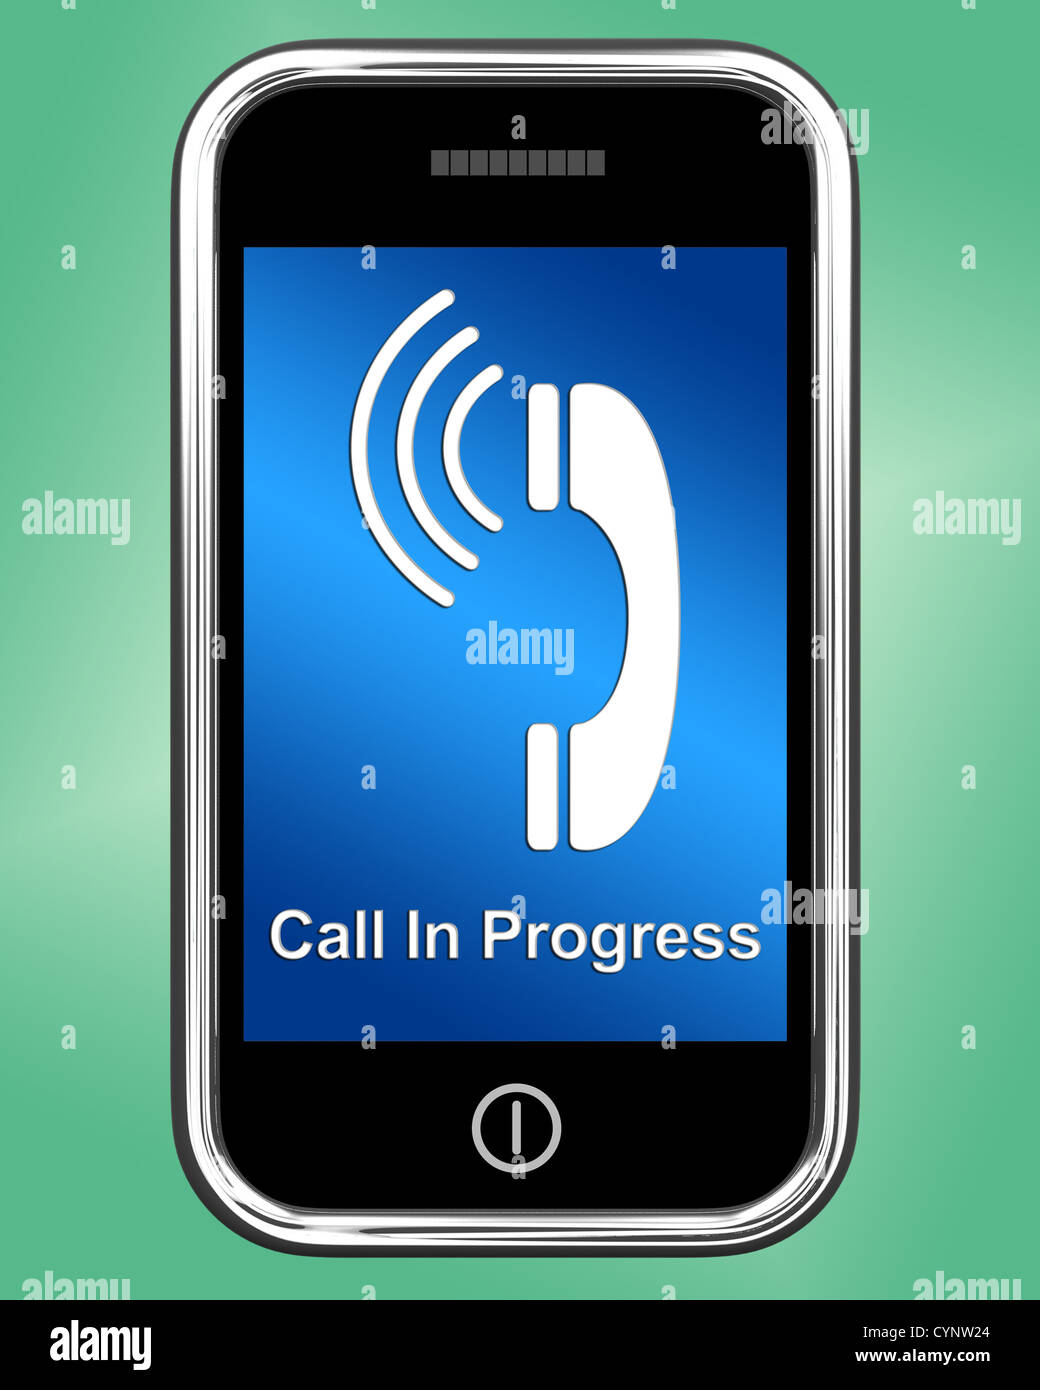 Call In Progress Message On A Mobile Phone Stock Photo